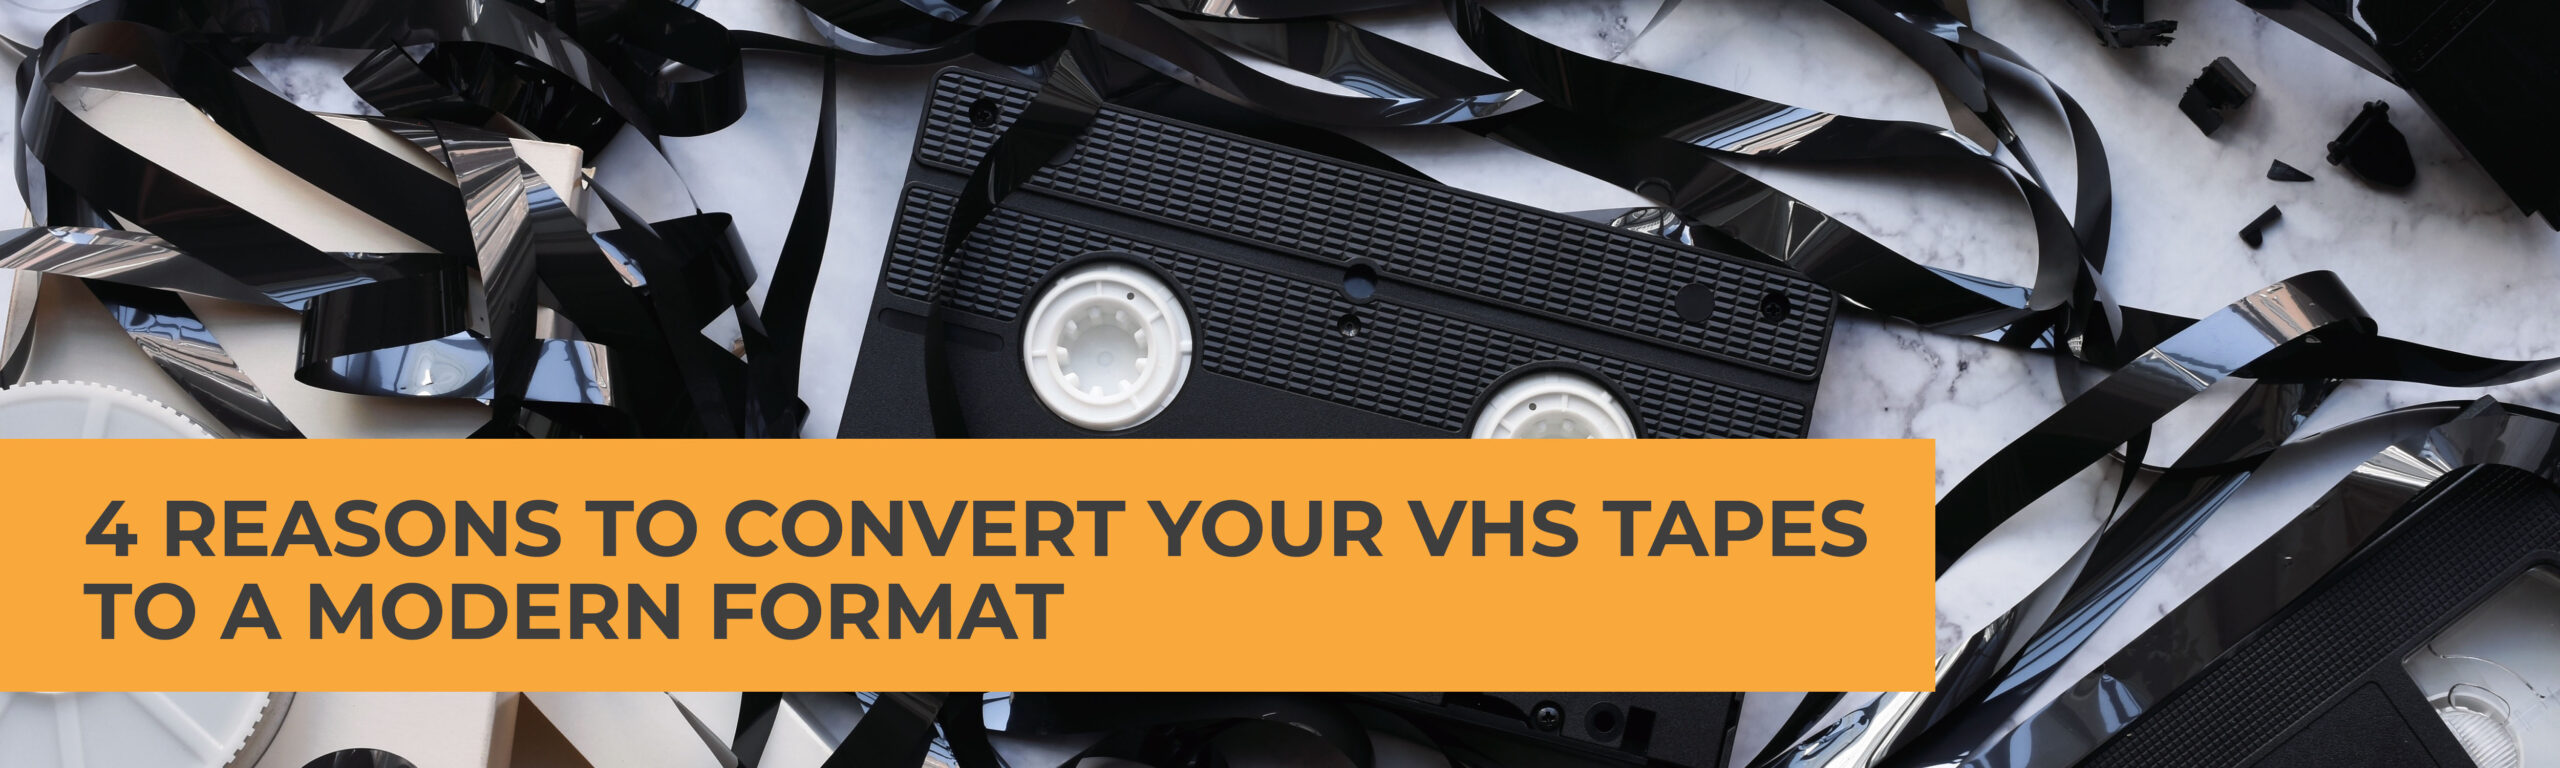 Converting VHS Tapes to a Modern Format